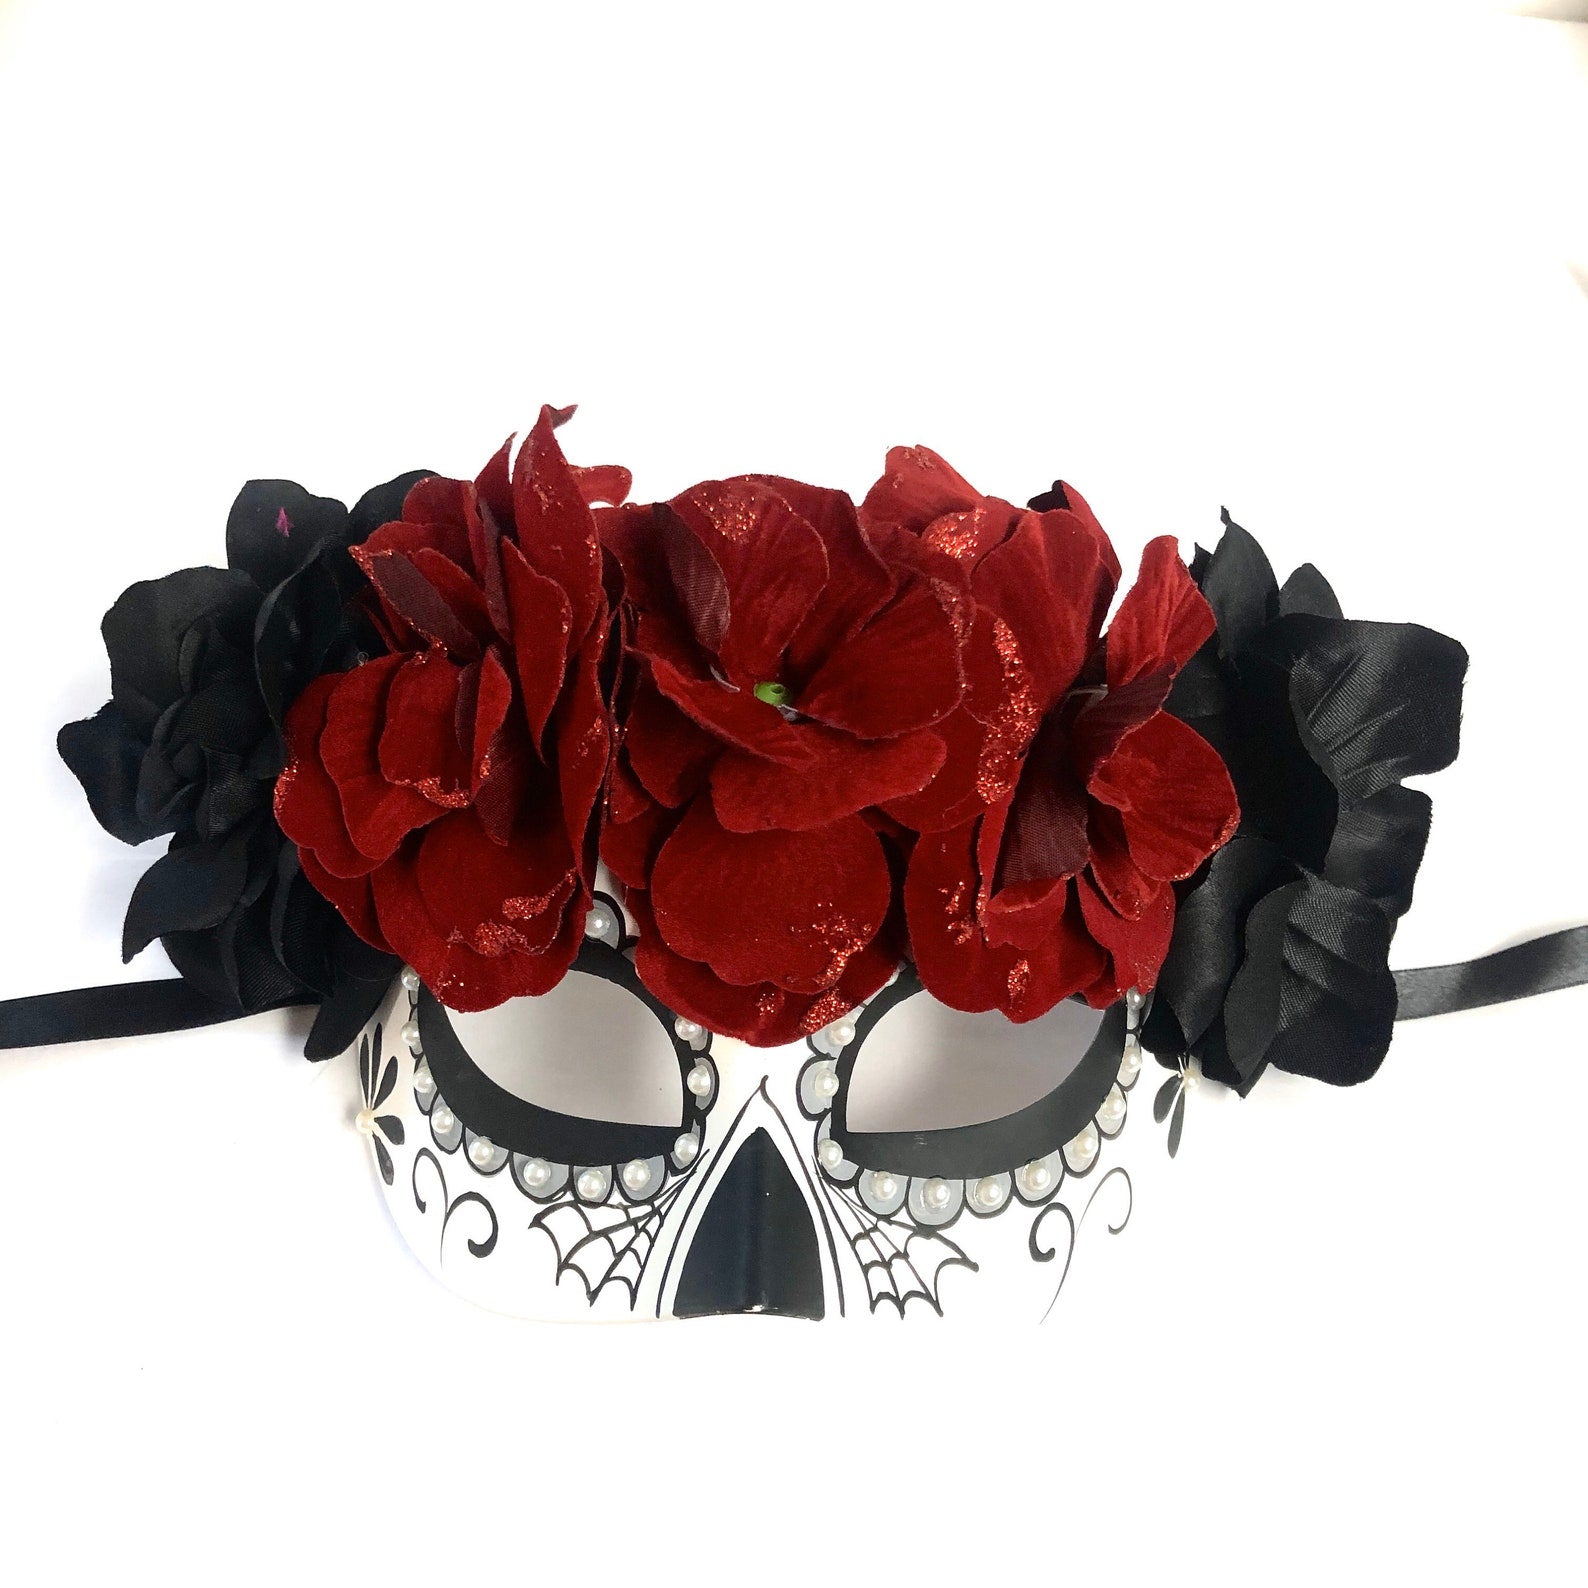 Womens sugar skull day of the dead masquerade mask for sale.